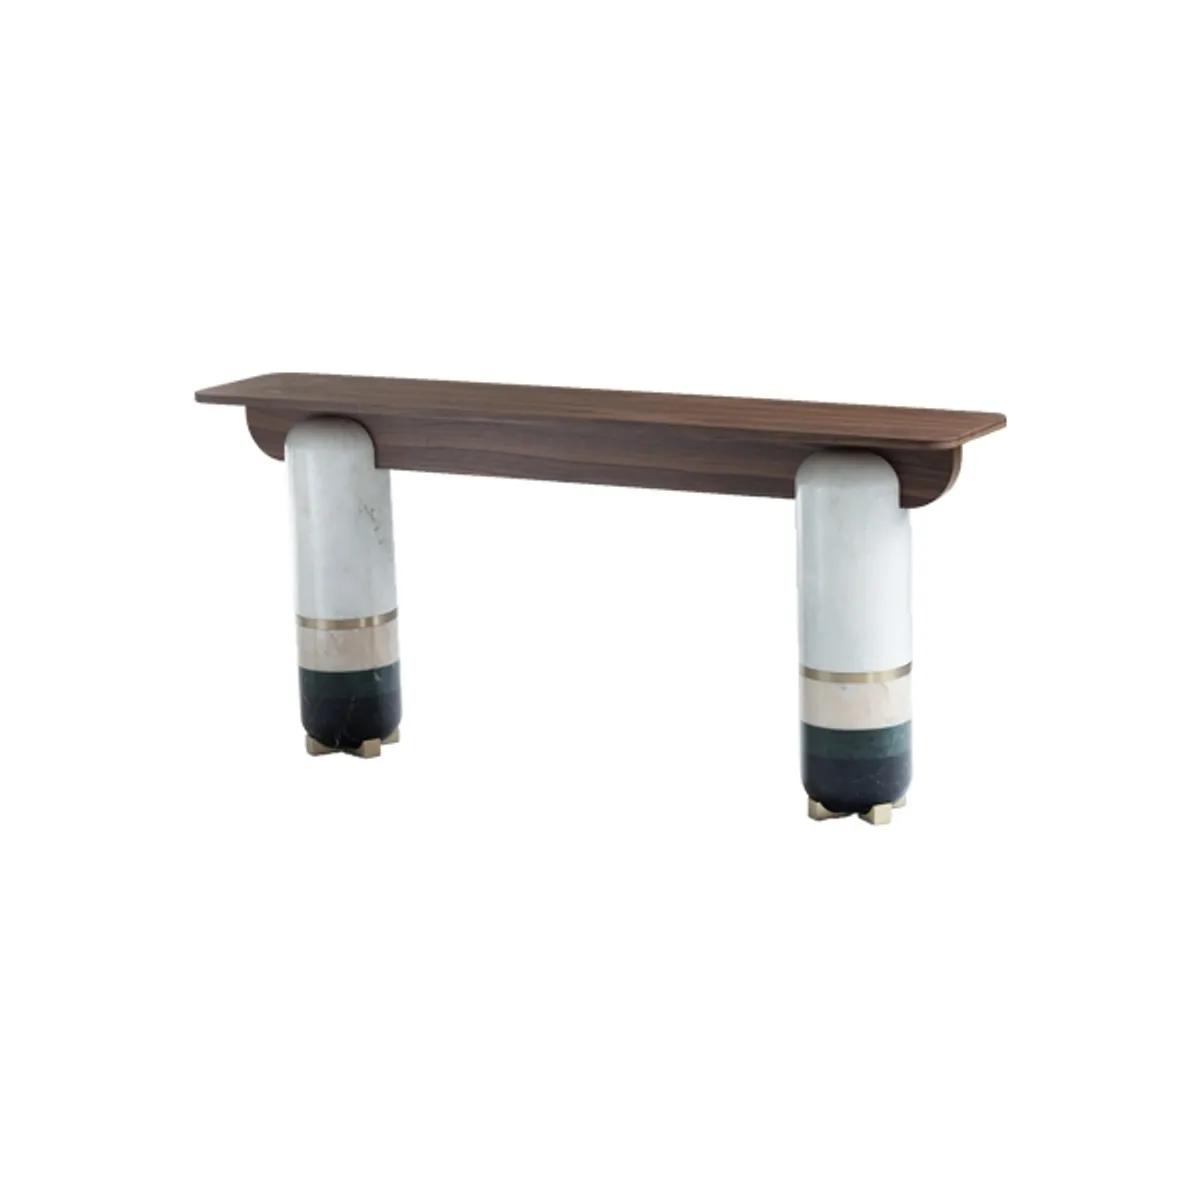 Grandiose console table Inside Out Contracts